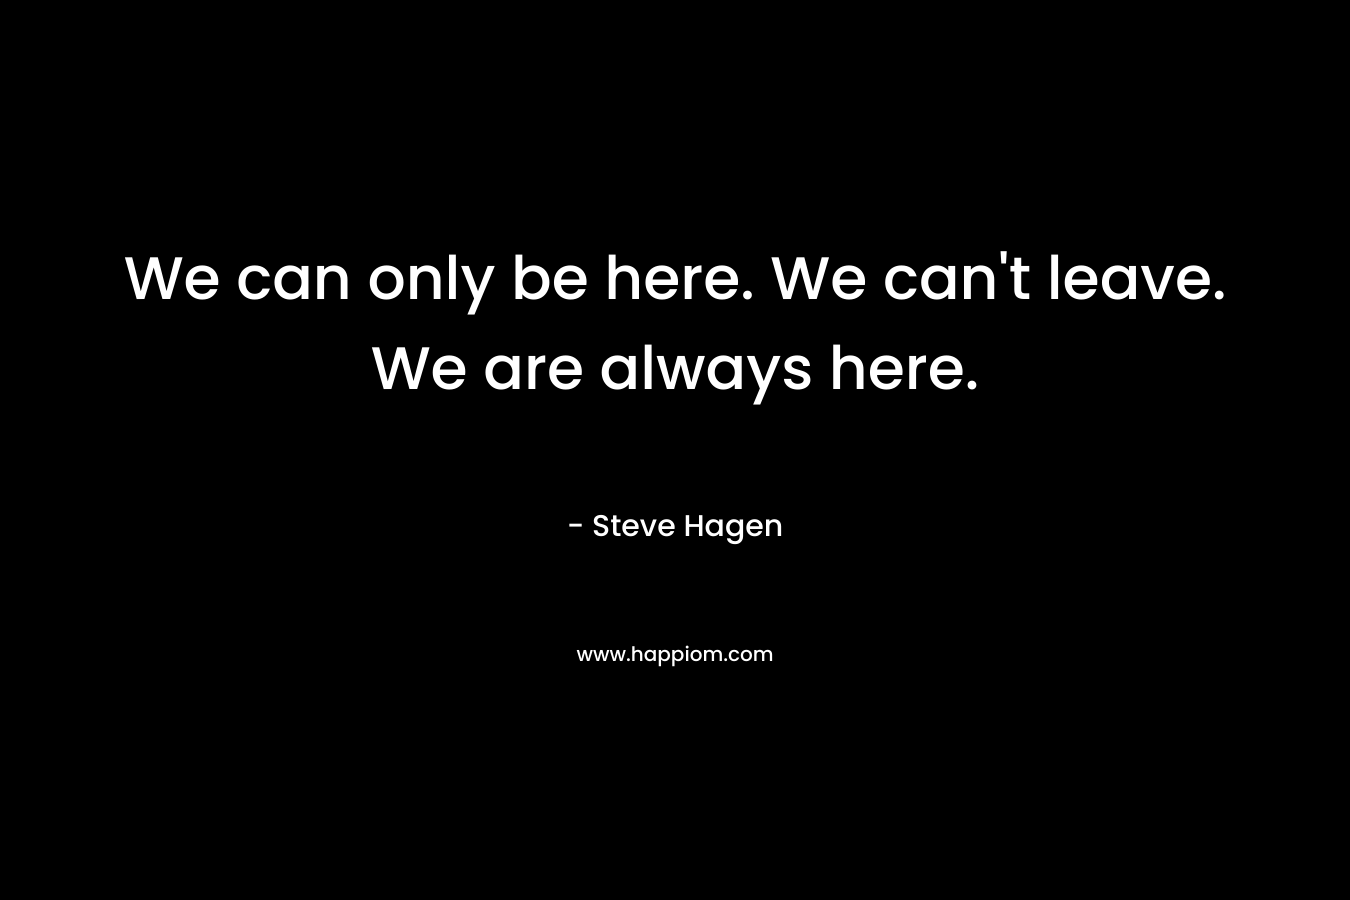 We can only be here. We can't leave. We are always here.